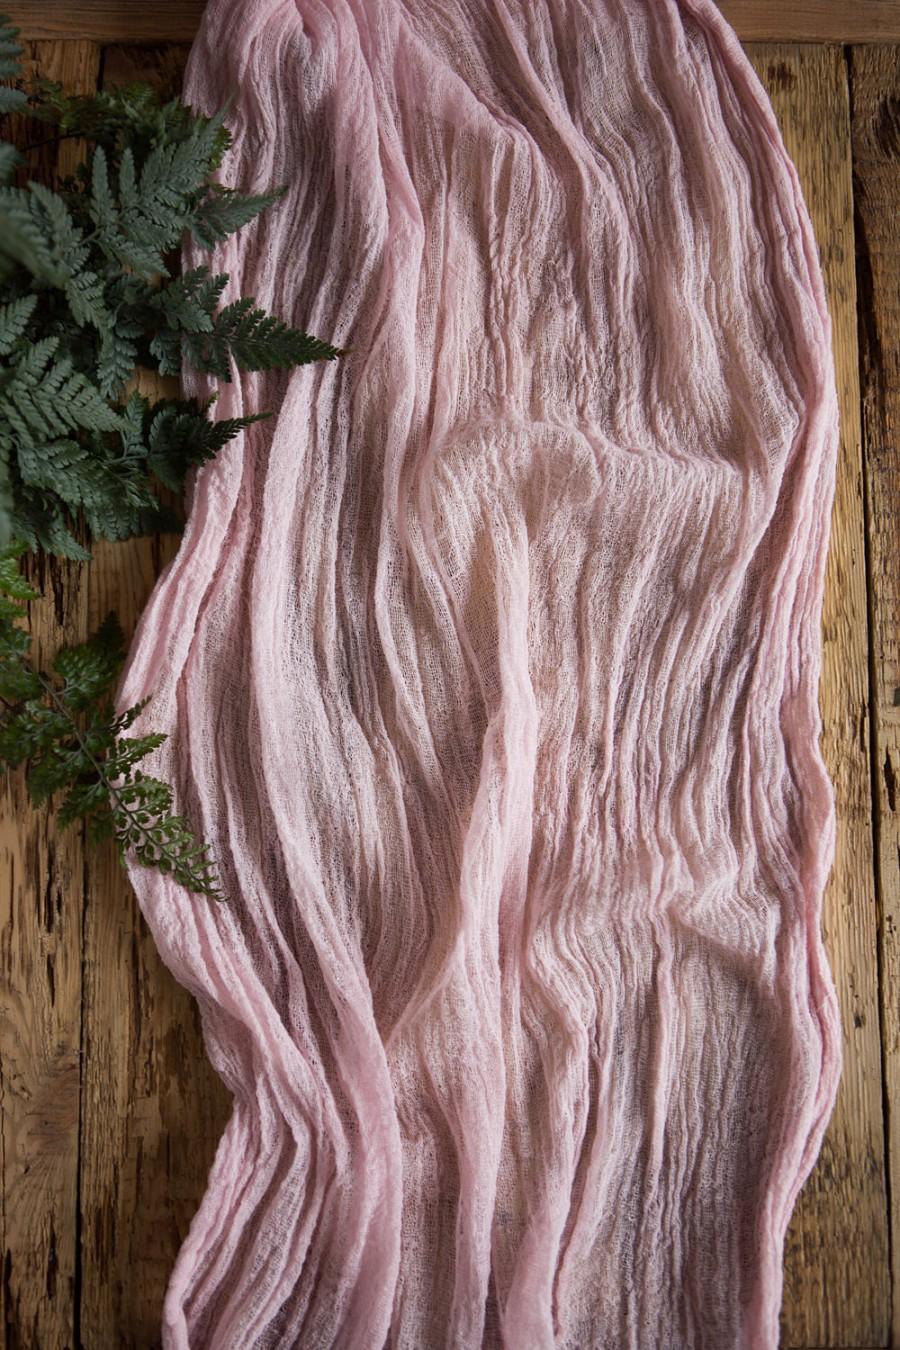 Hand Dyed Cheesecloth